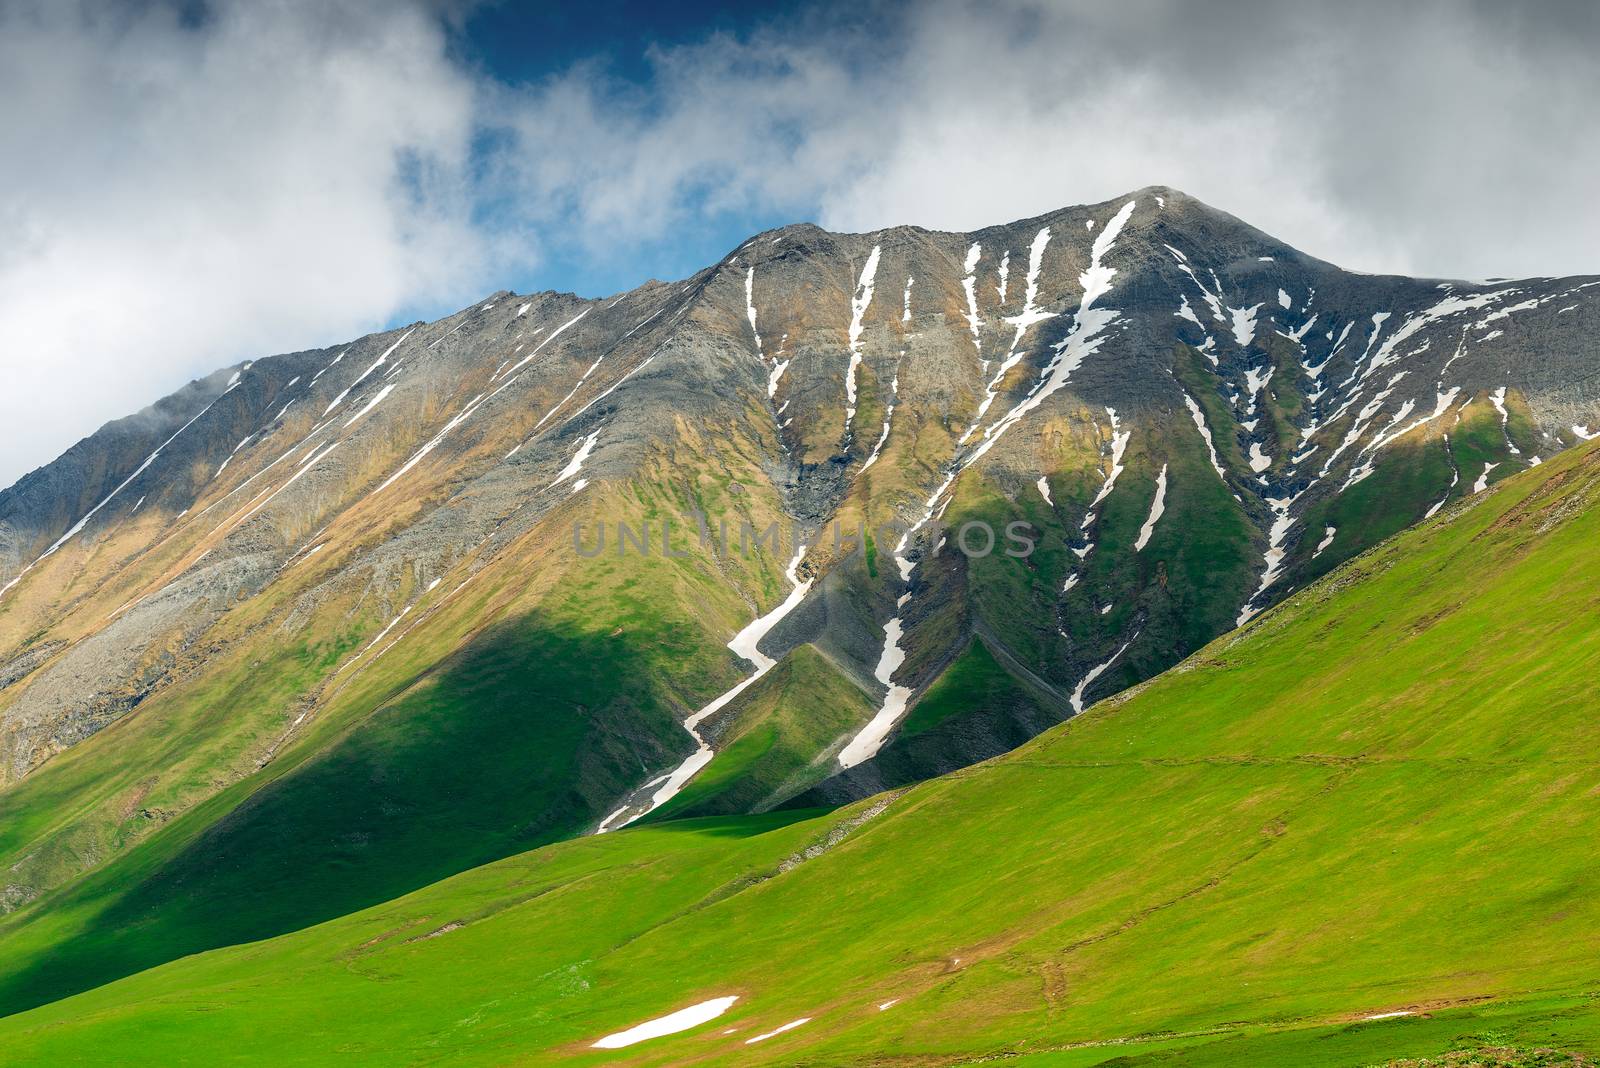 Relief of the Caucasus Mountains with the remains of snow in the hollows, Caucasus Mountains in June, Georgia